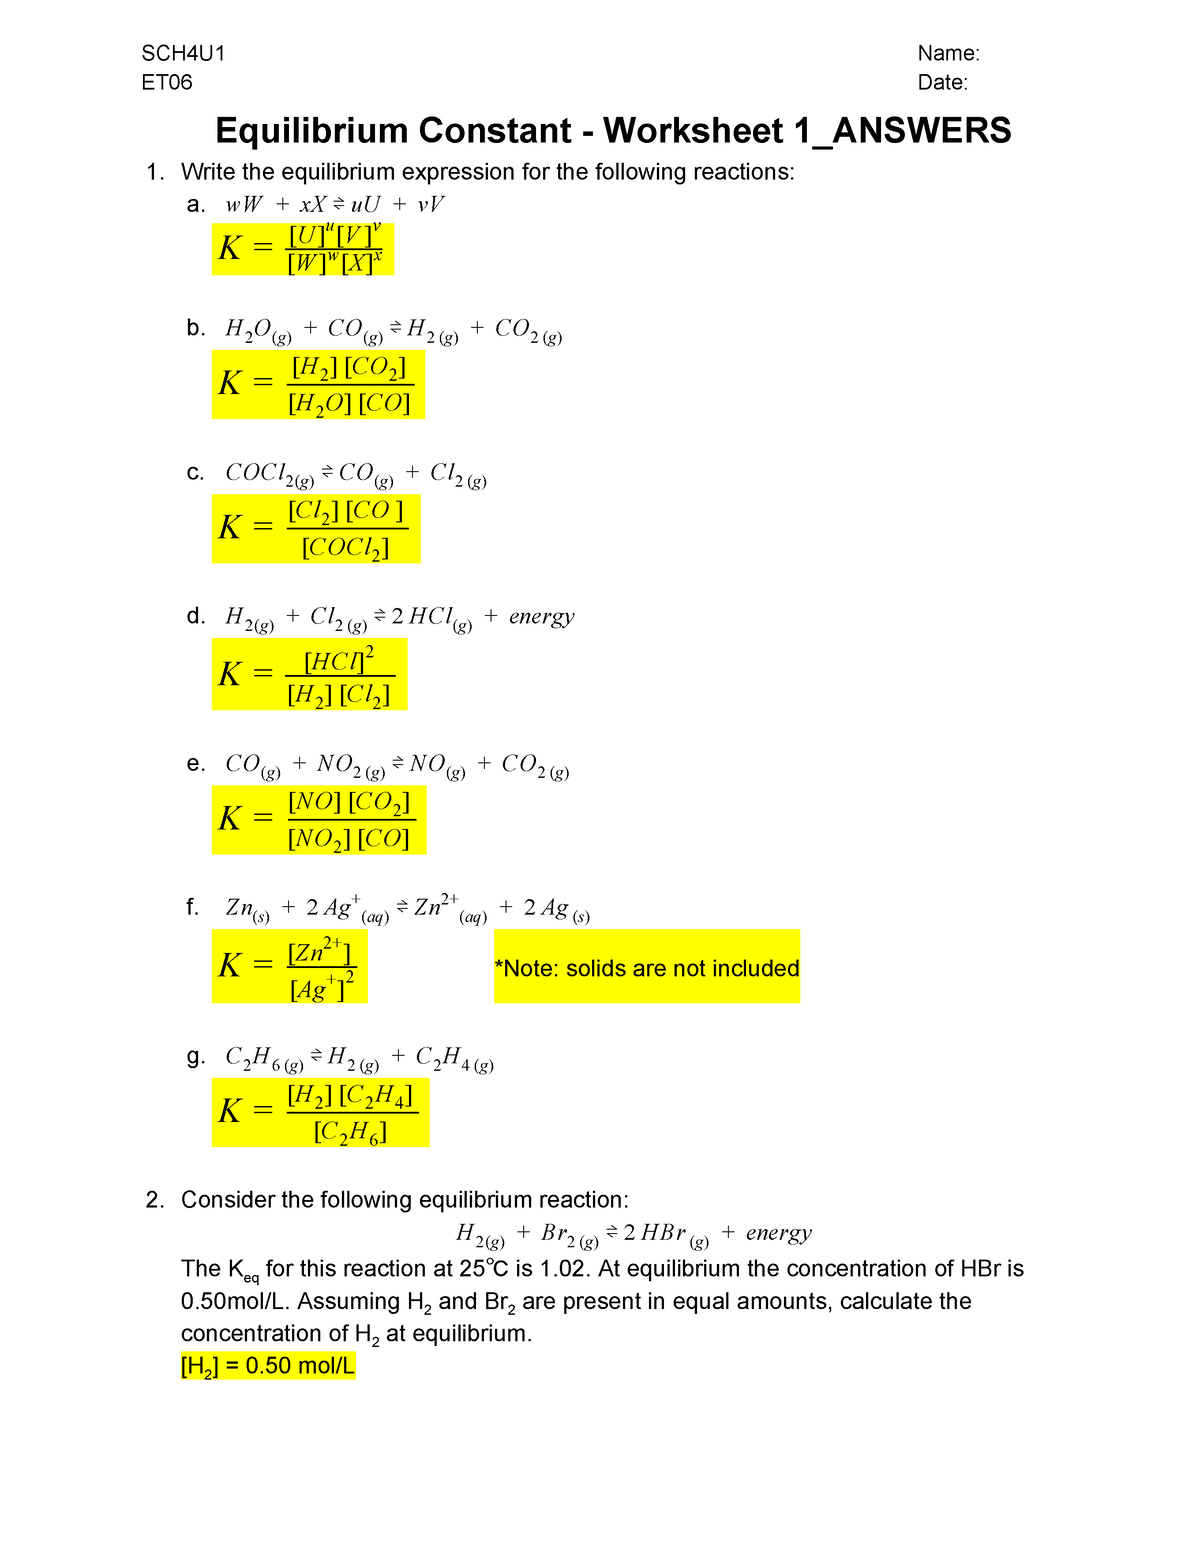 03 Equilibrium Constant Worksheet 1 Answers SCH4U1 Name: ET06 Date